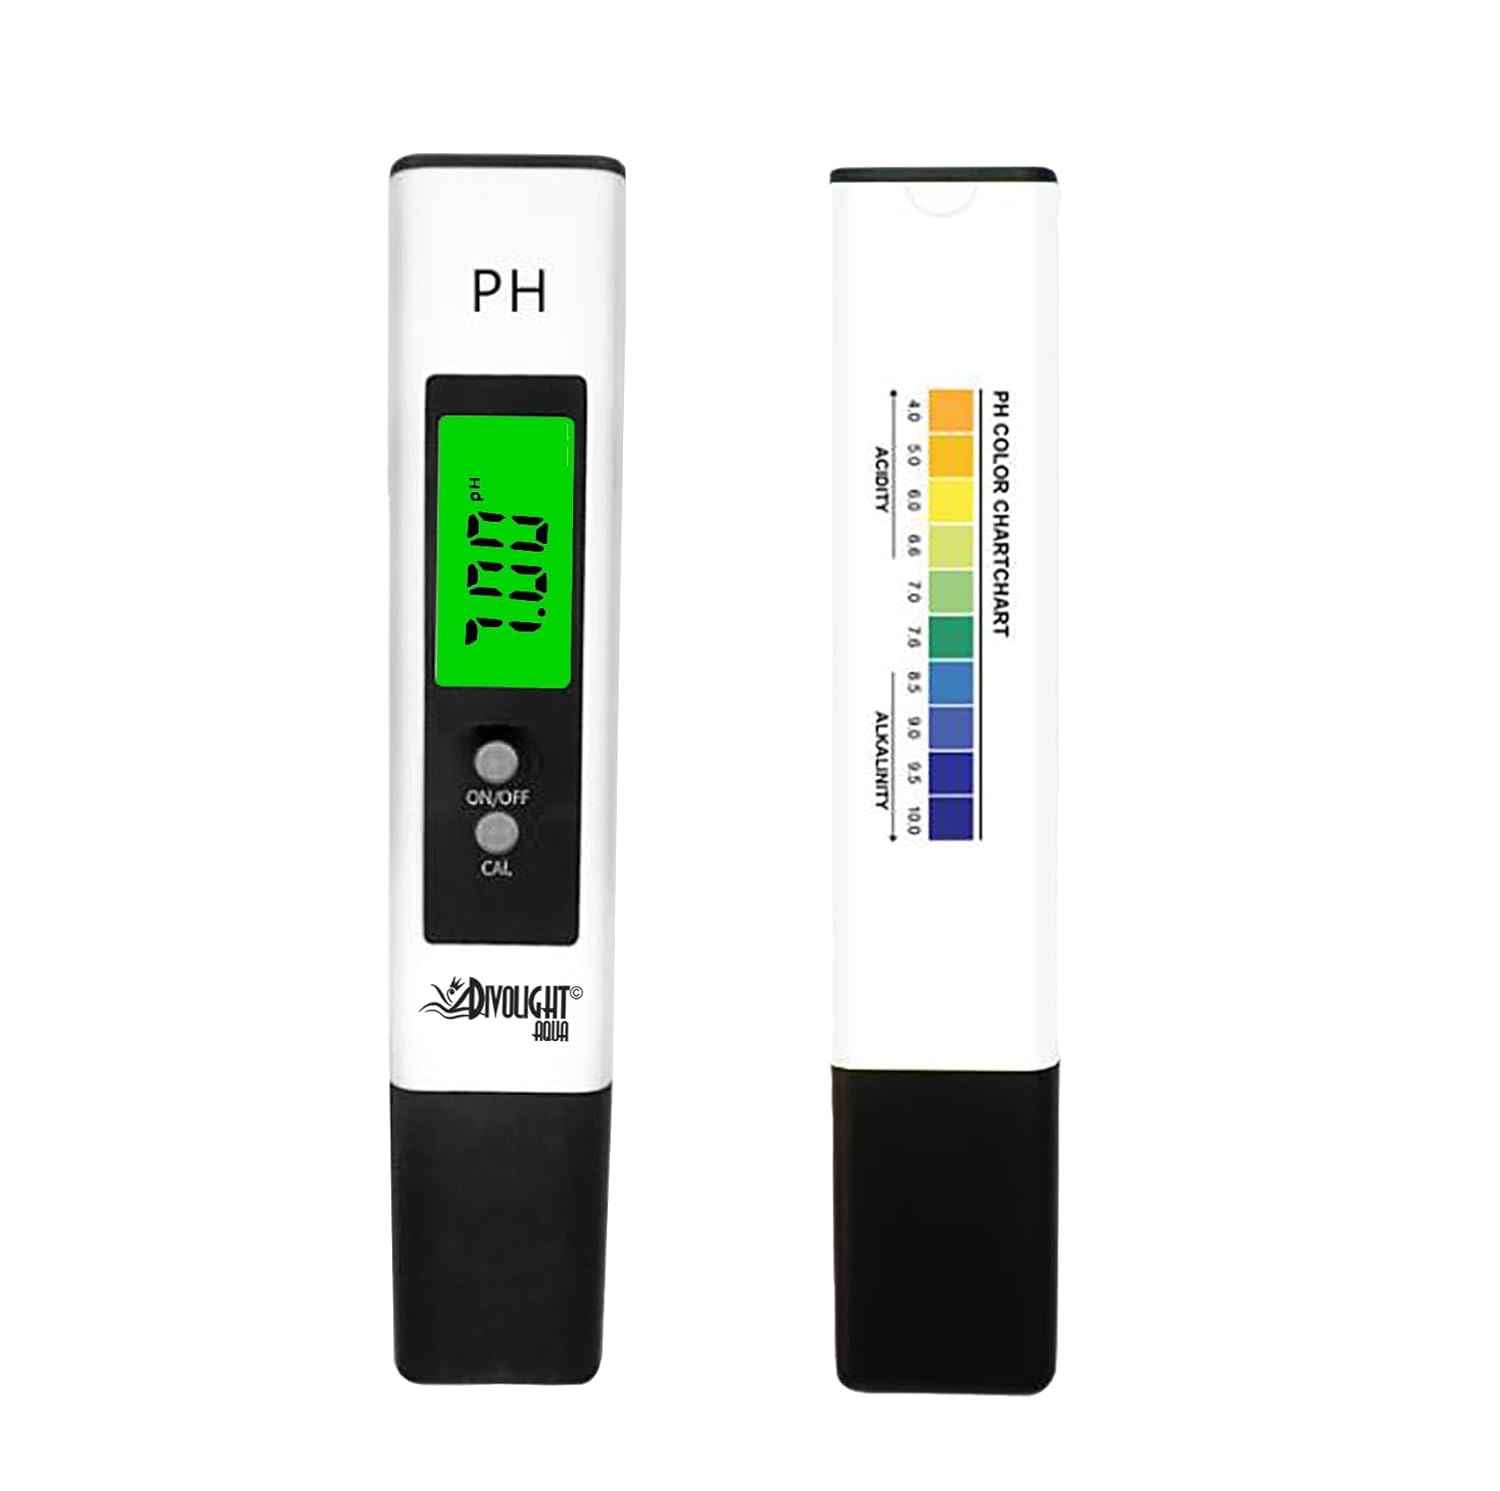 Water Tester PH Meter, Digital PH Meter 0.01 PH High Accuracy Water Quality Tester with 0-14 PH Measurement Range for Household Drinking, Pool and Aquarium Water PH Tester Design with ATC